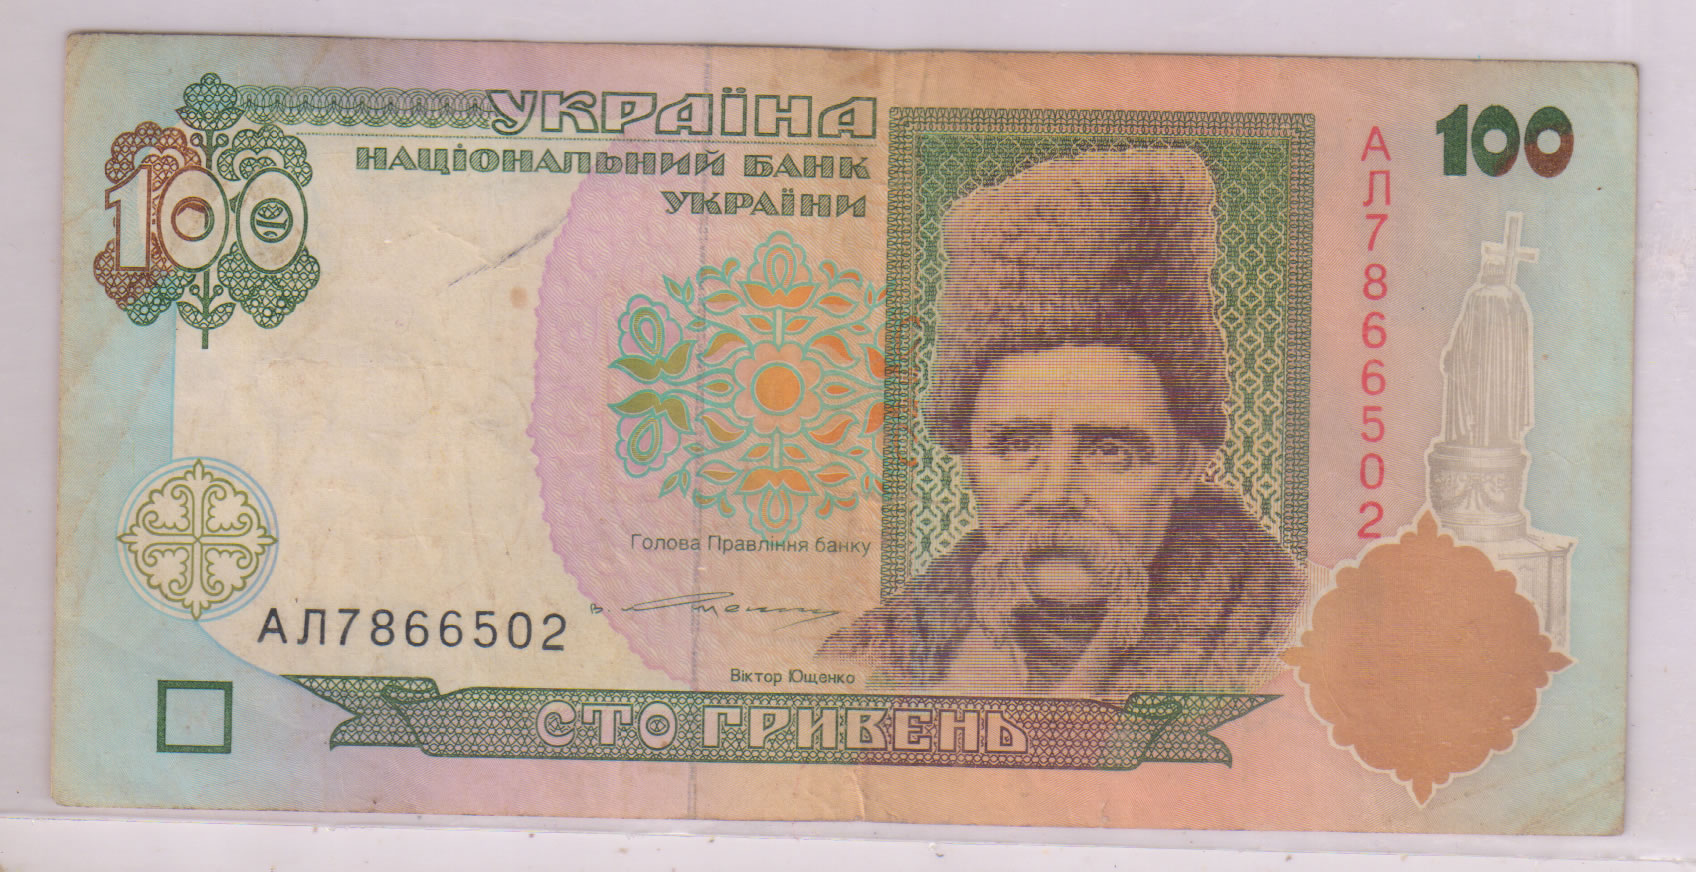 Ukraine – 100 hryvnia 1996 used currency note - KB Coins & Currencies